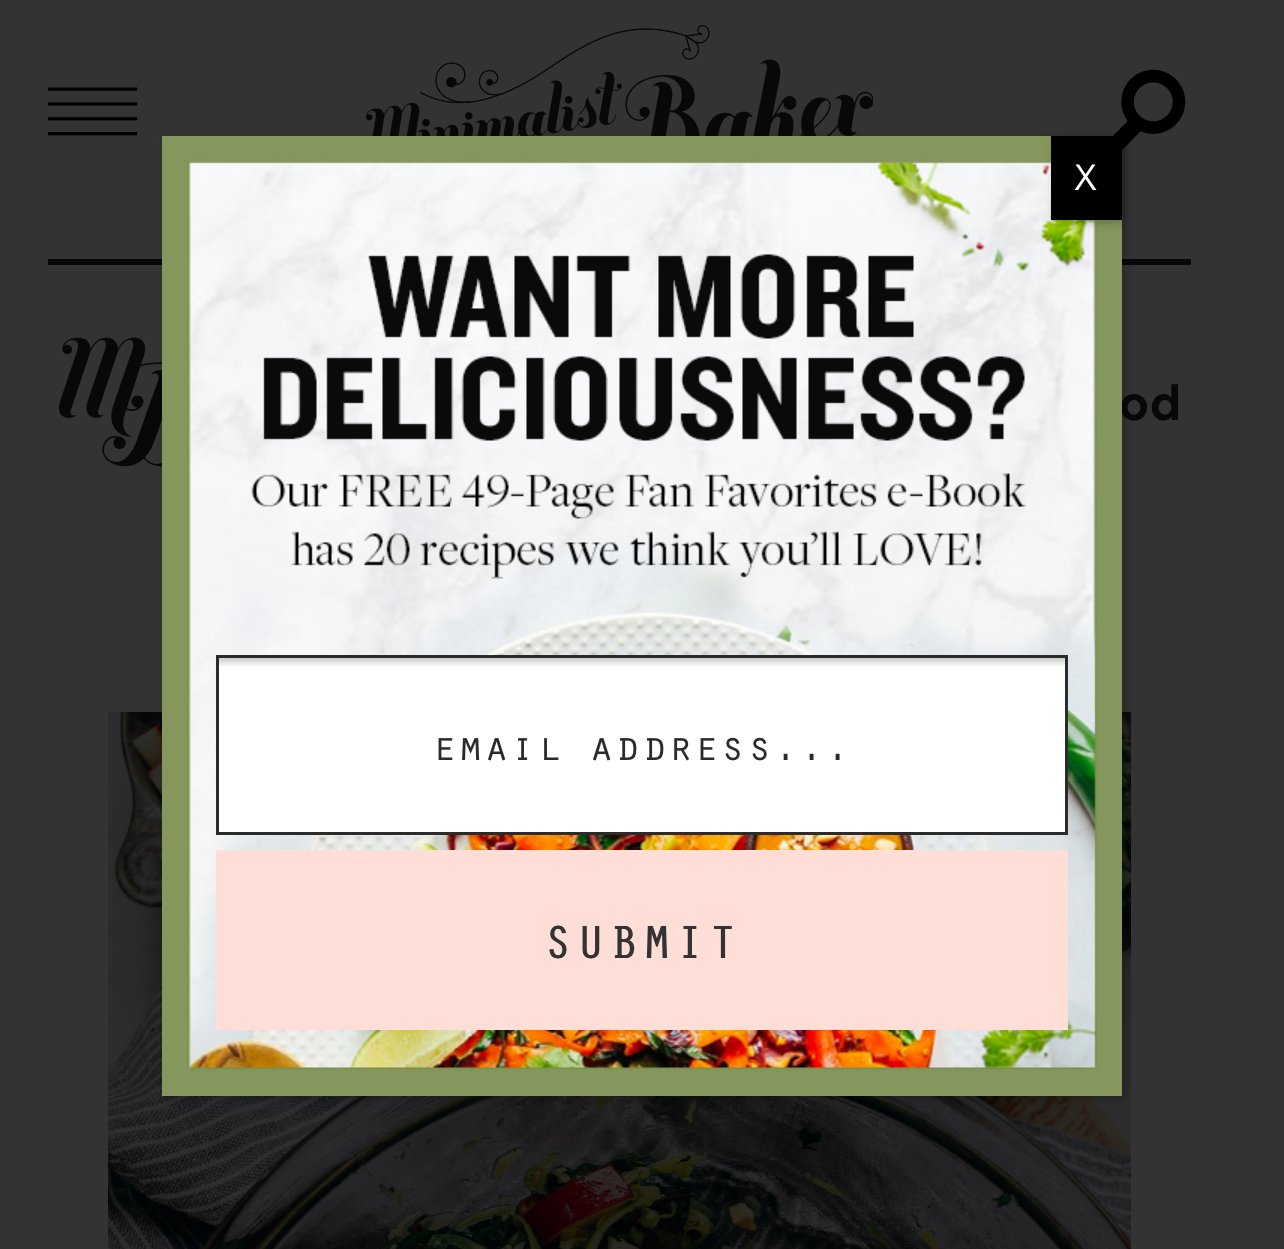 Example of free content used to attract subscribers on the Minimalist Baker website